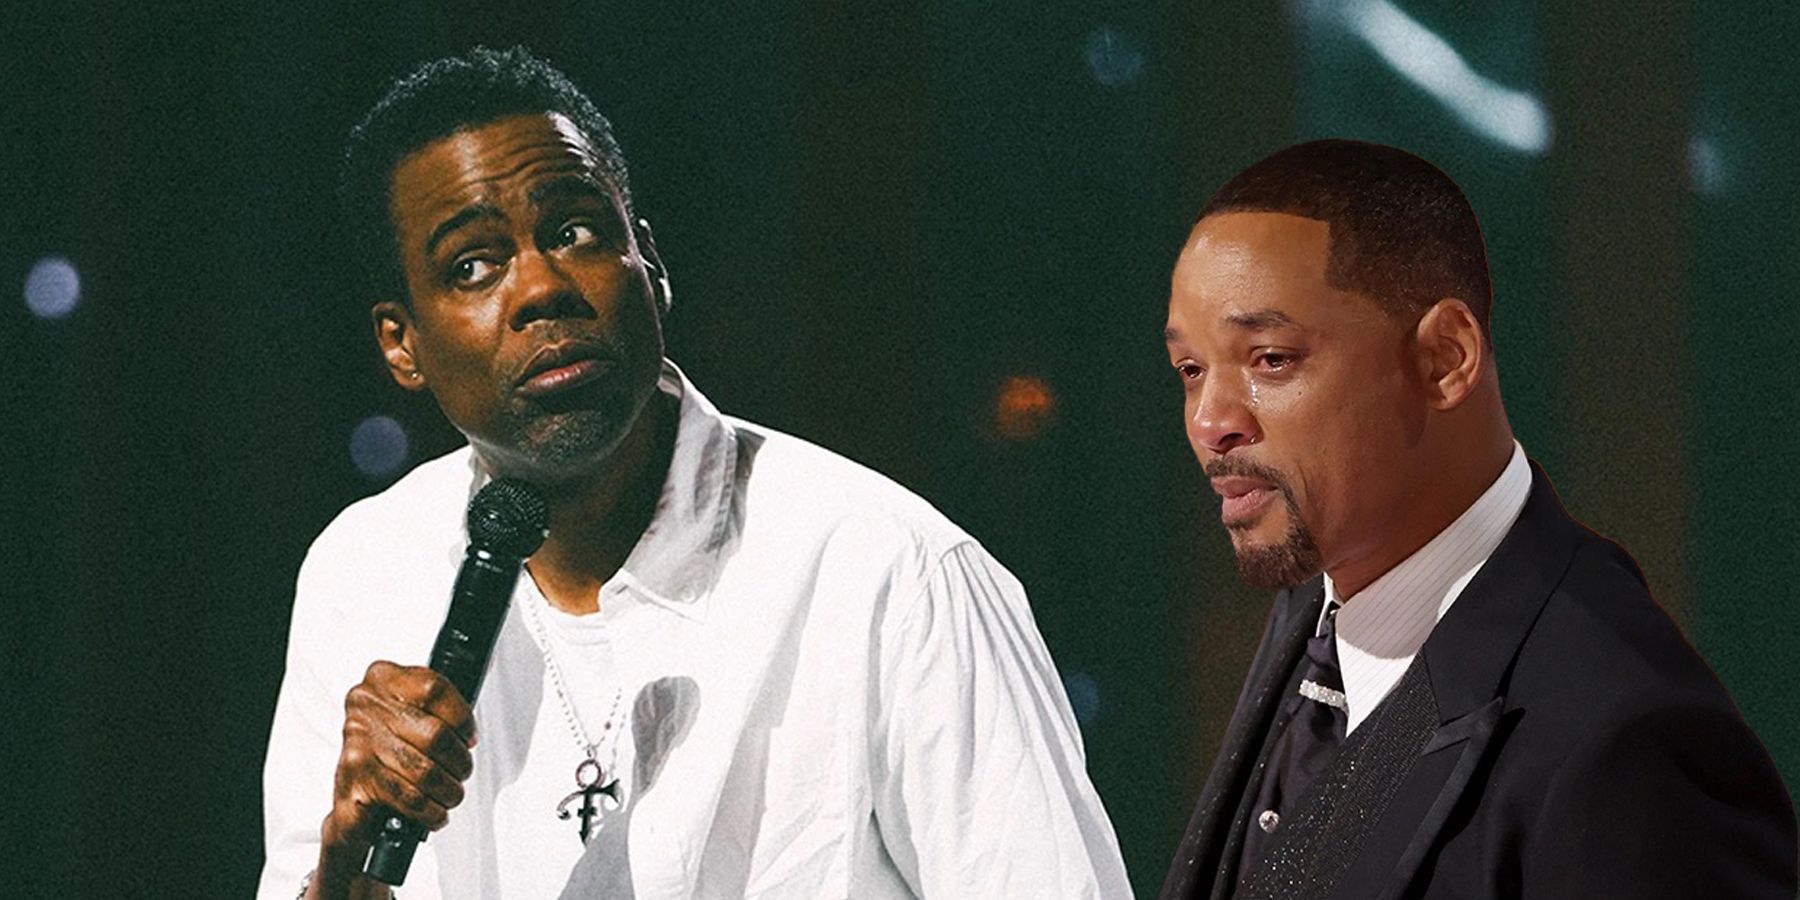 Chris Rock Will Smith Oscars Slap Stand-Up Special